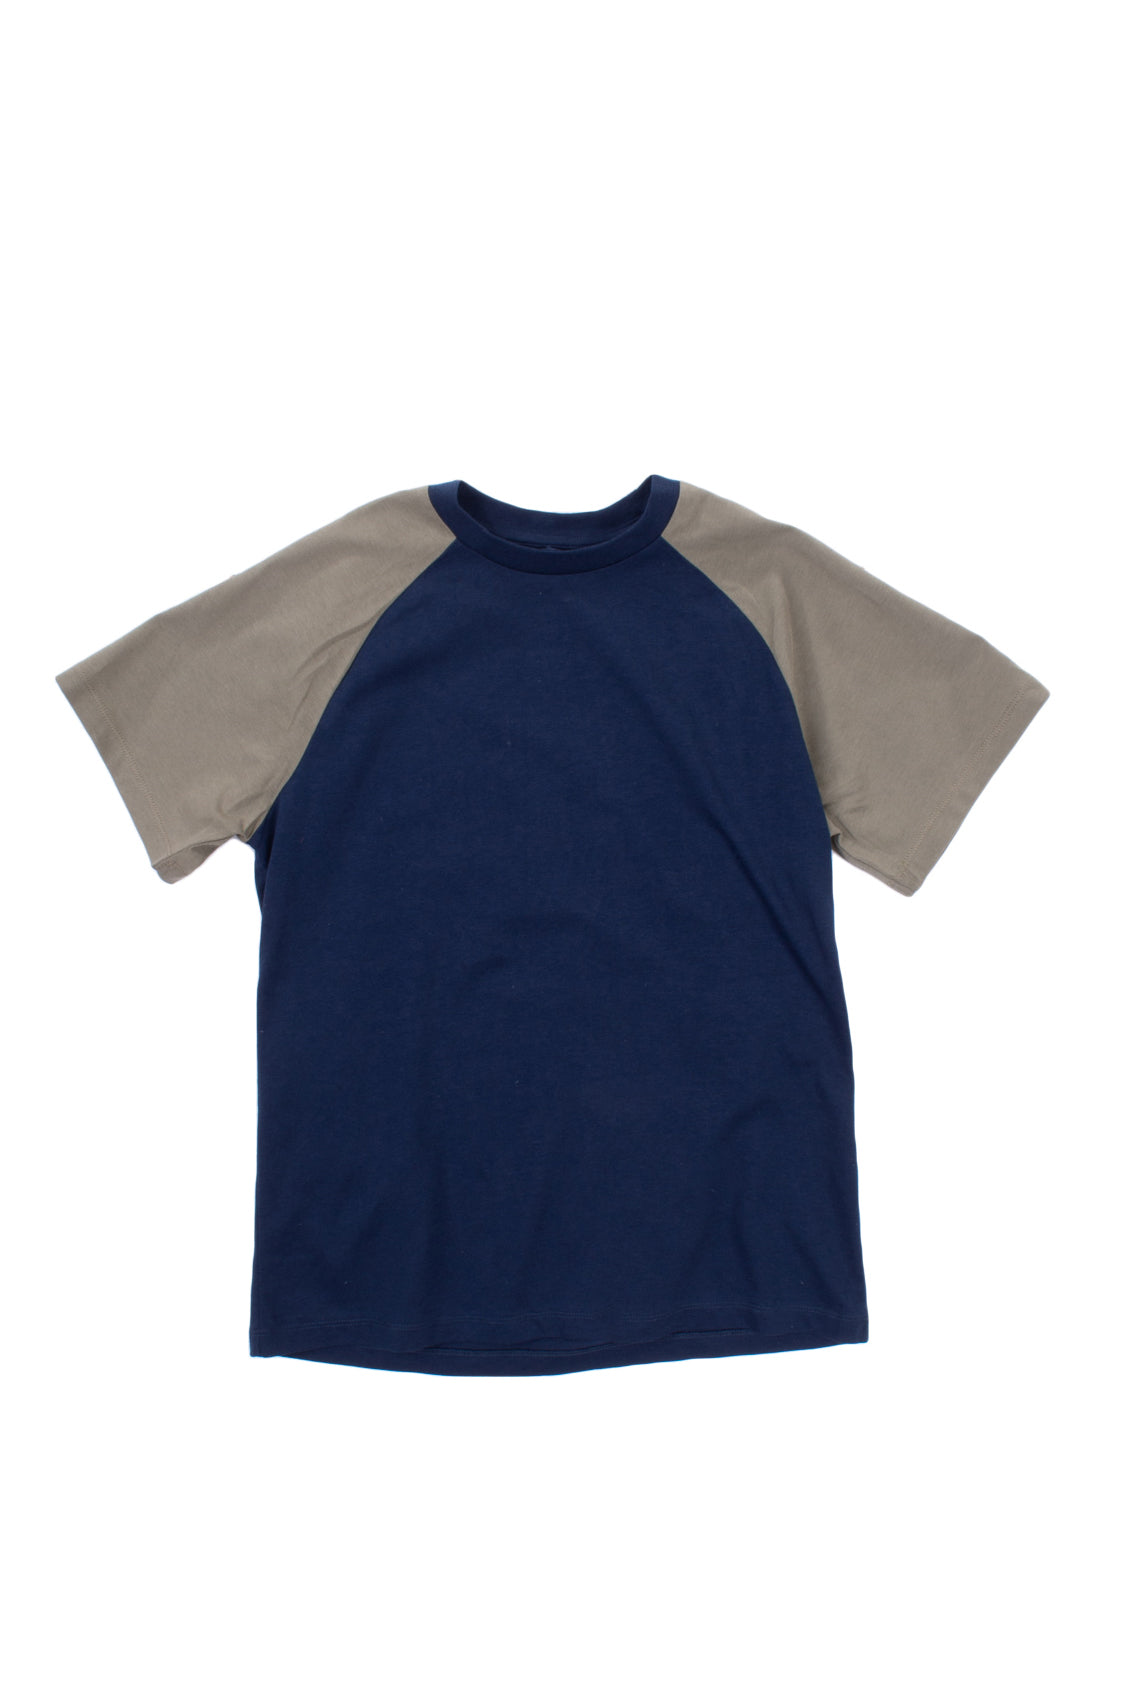 8 KIDS T-Shirt Top Size 12Y Two Tone Short Sleeve Crew Neck Made in Portugal gallery main photo